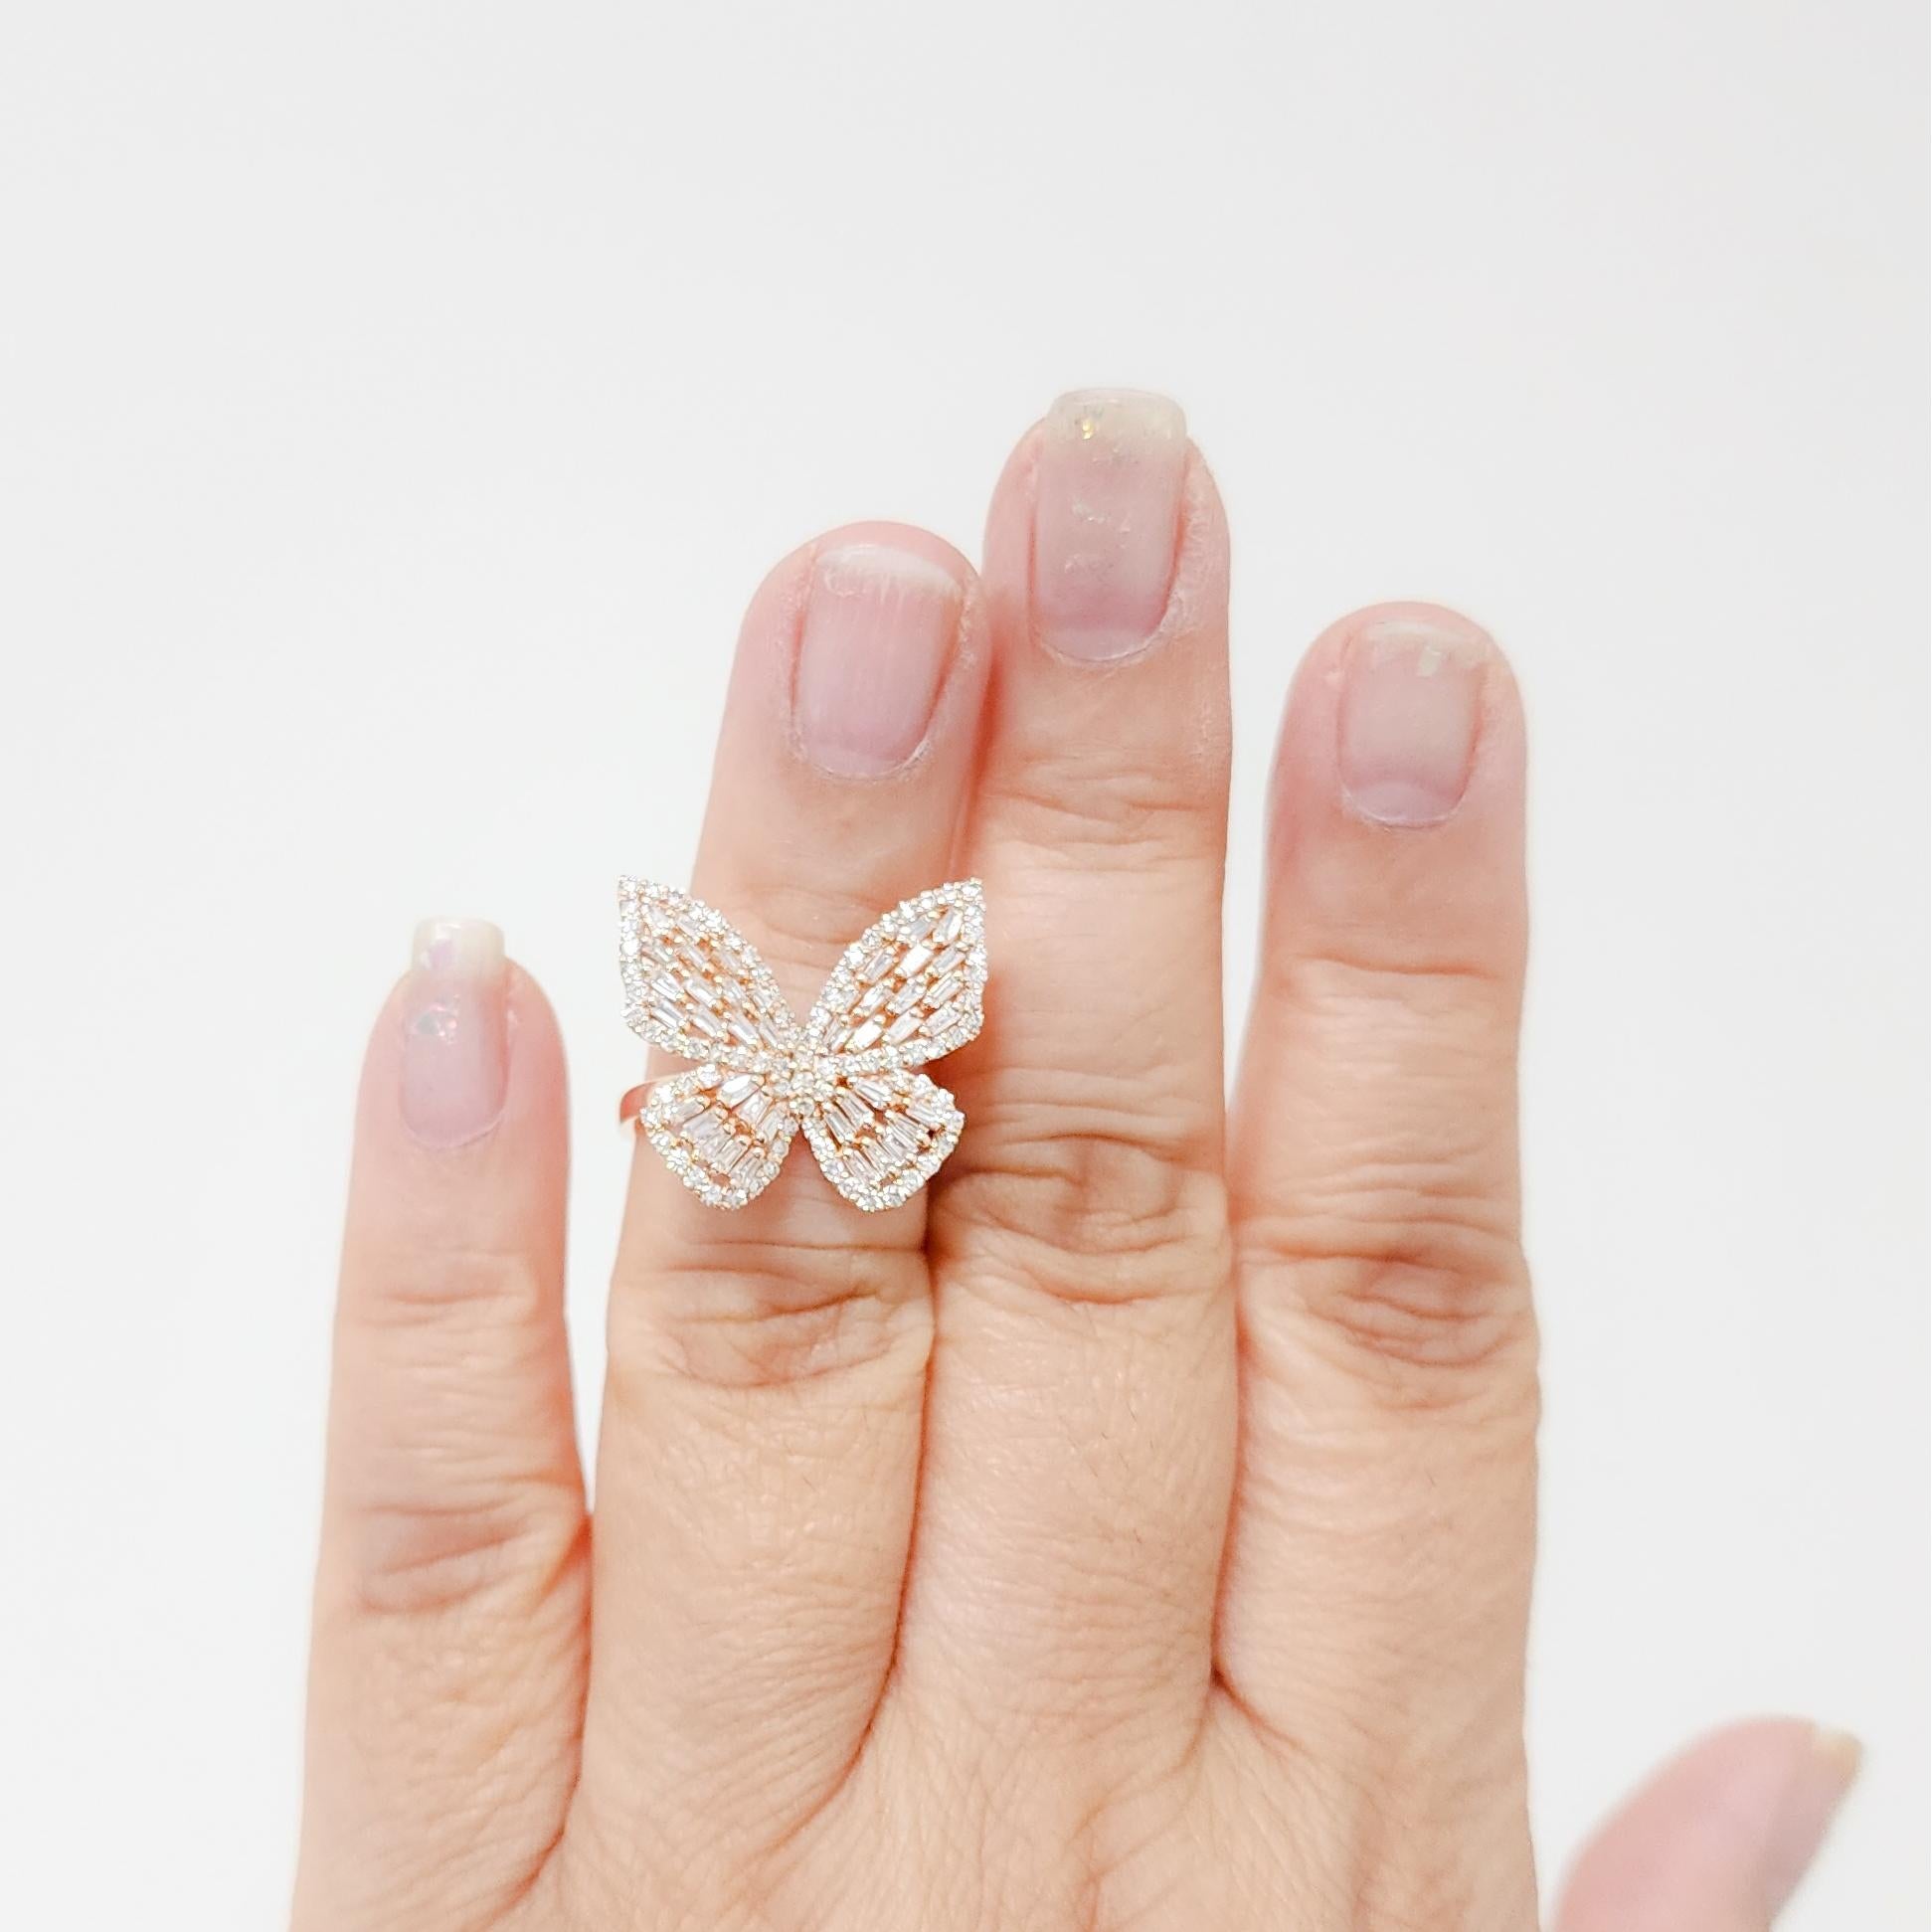 Absolutely stunning 1.33 ct. white diamond baguette and round butterfly design ring.  This ring is handmade in 14k rose gold with attention to great detail.  It's a fun and frivolous piece.  Ring size 6.75.  Comes in white and yellow gold as well. 